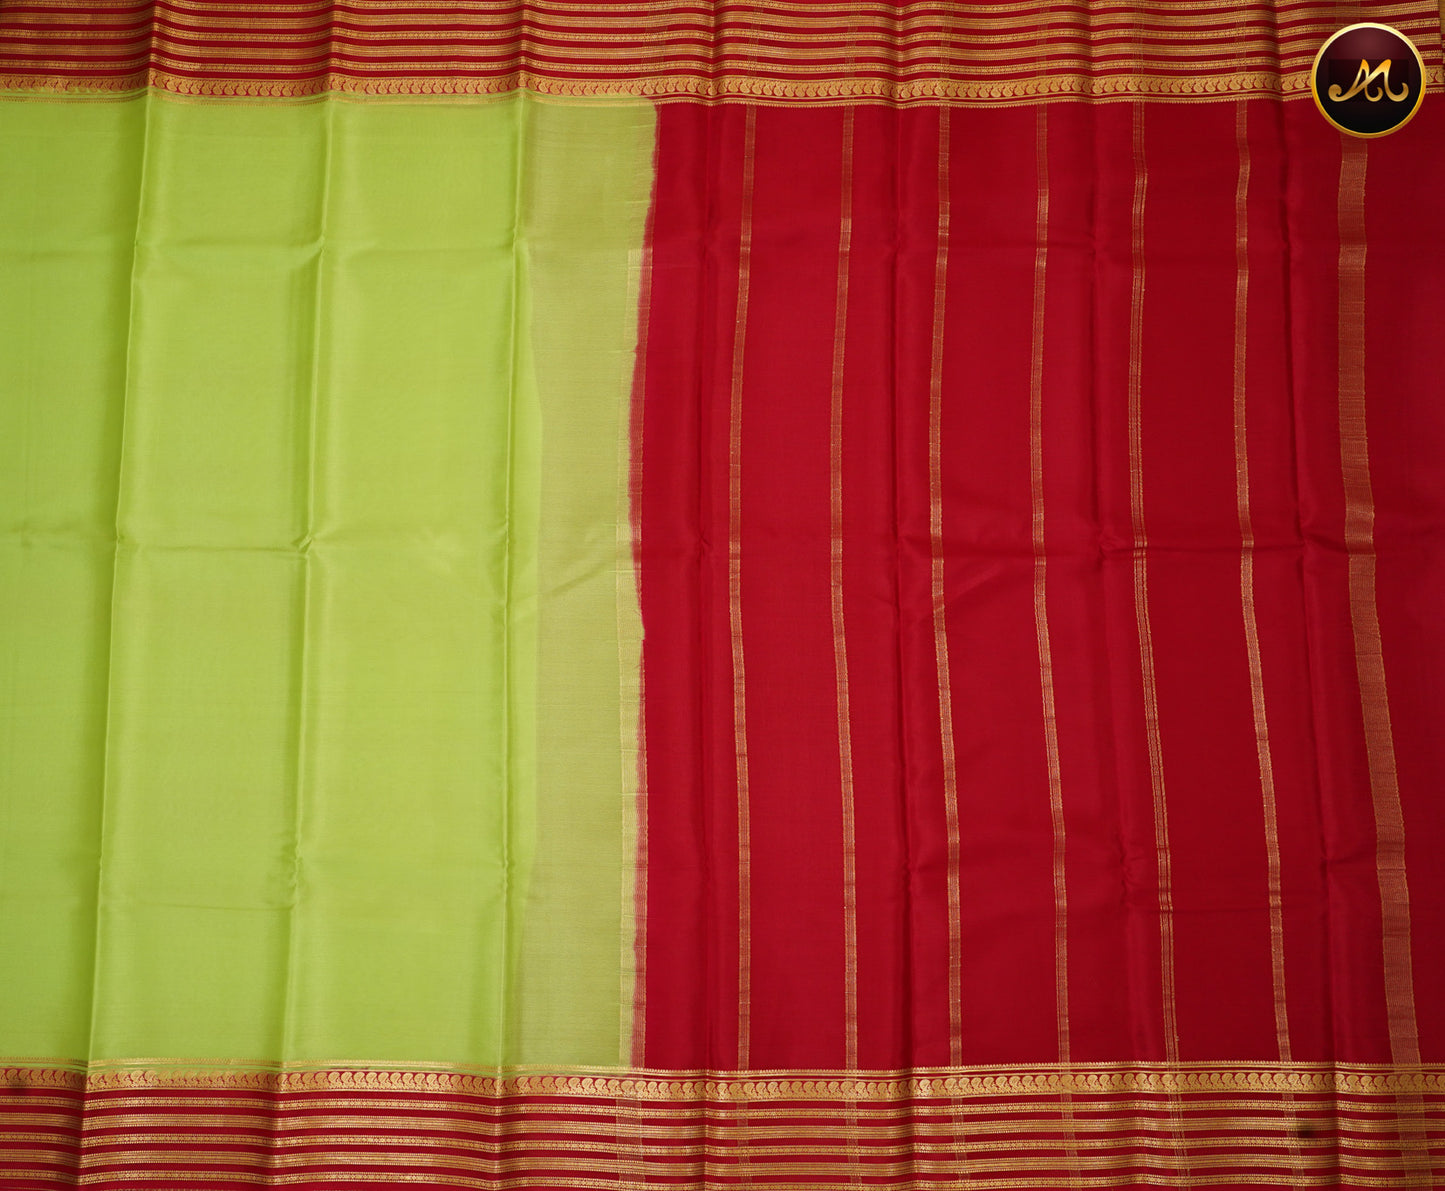 Mysore Crepe Silk saree in Lime Green and Red Colour combination with Gold zari Border and simple pallu